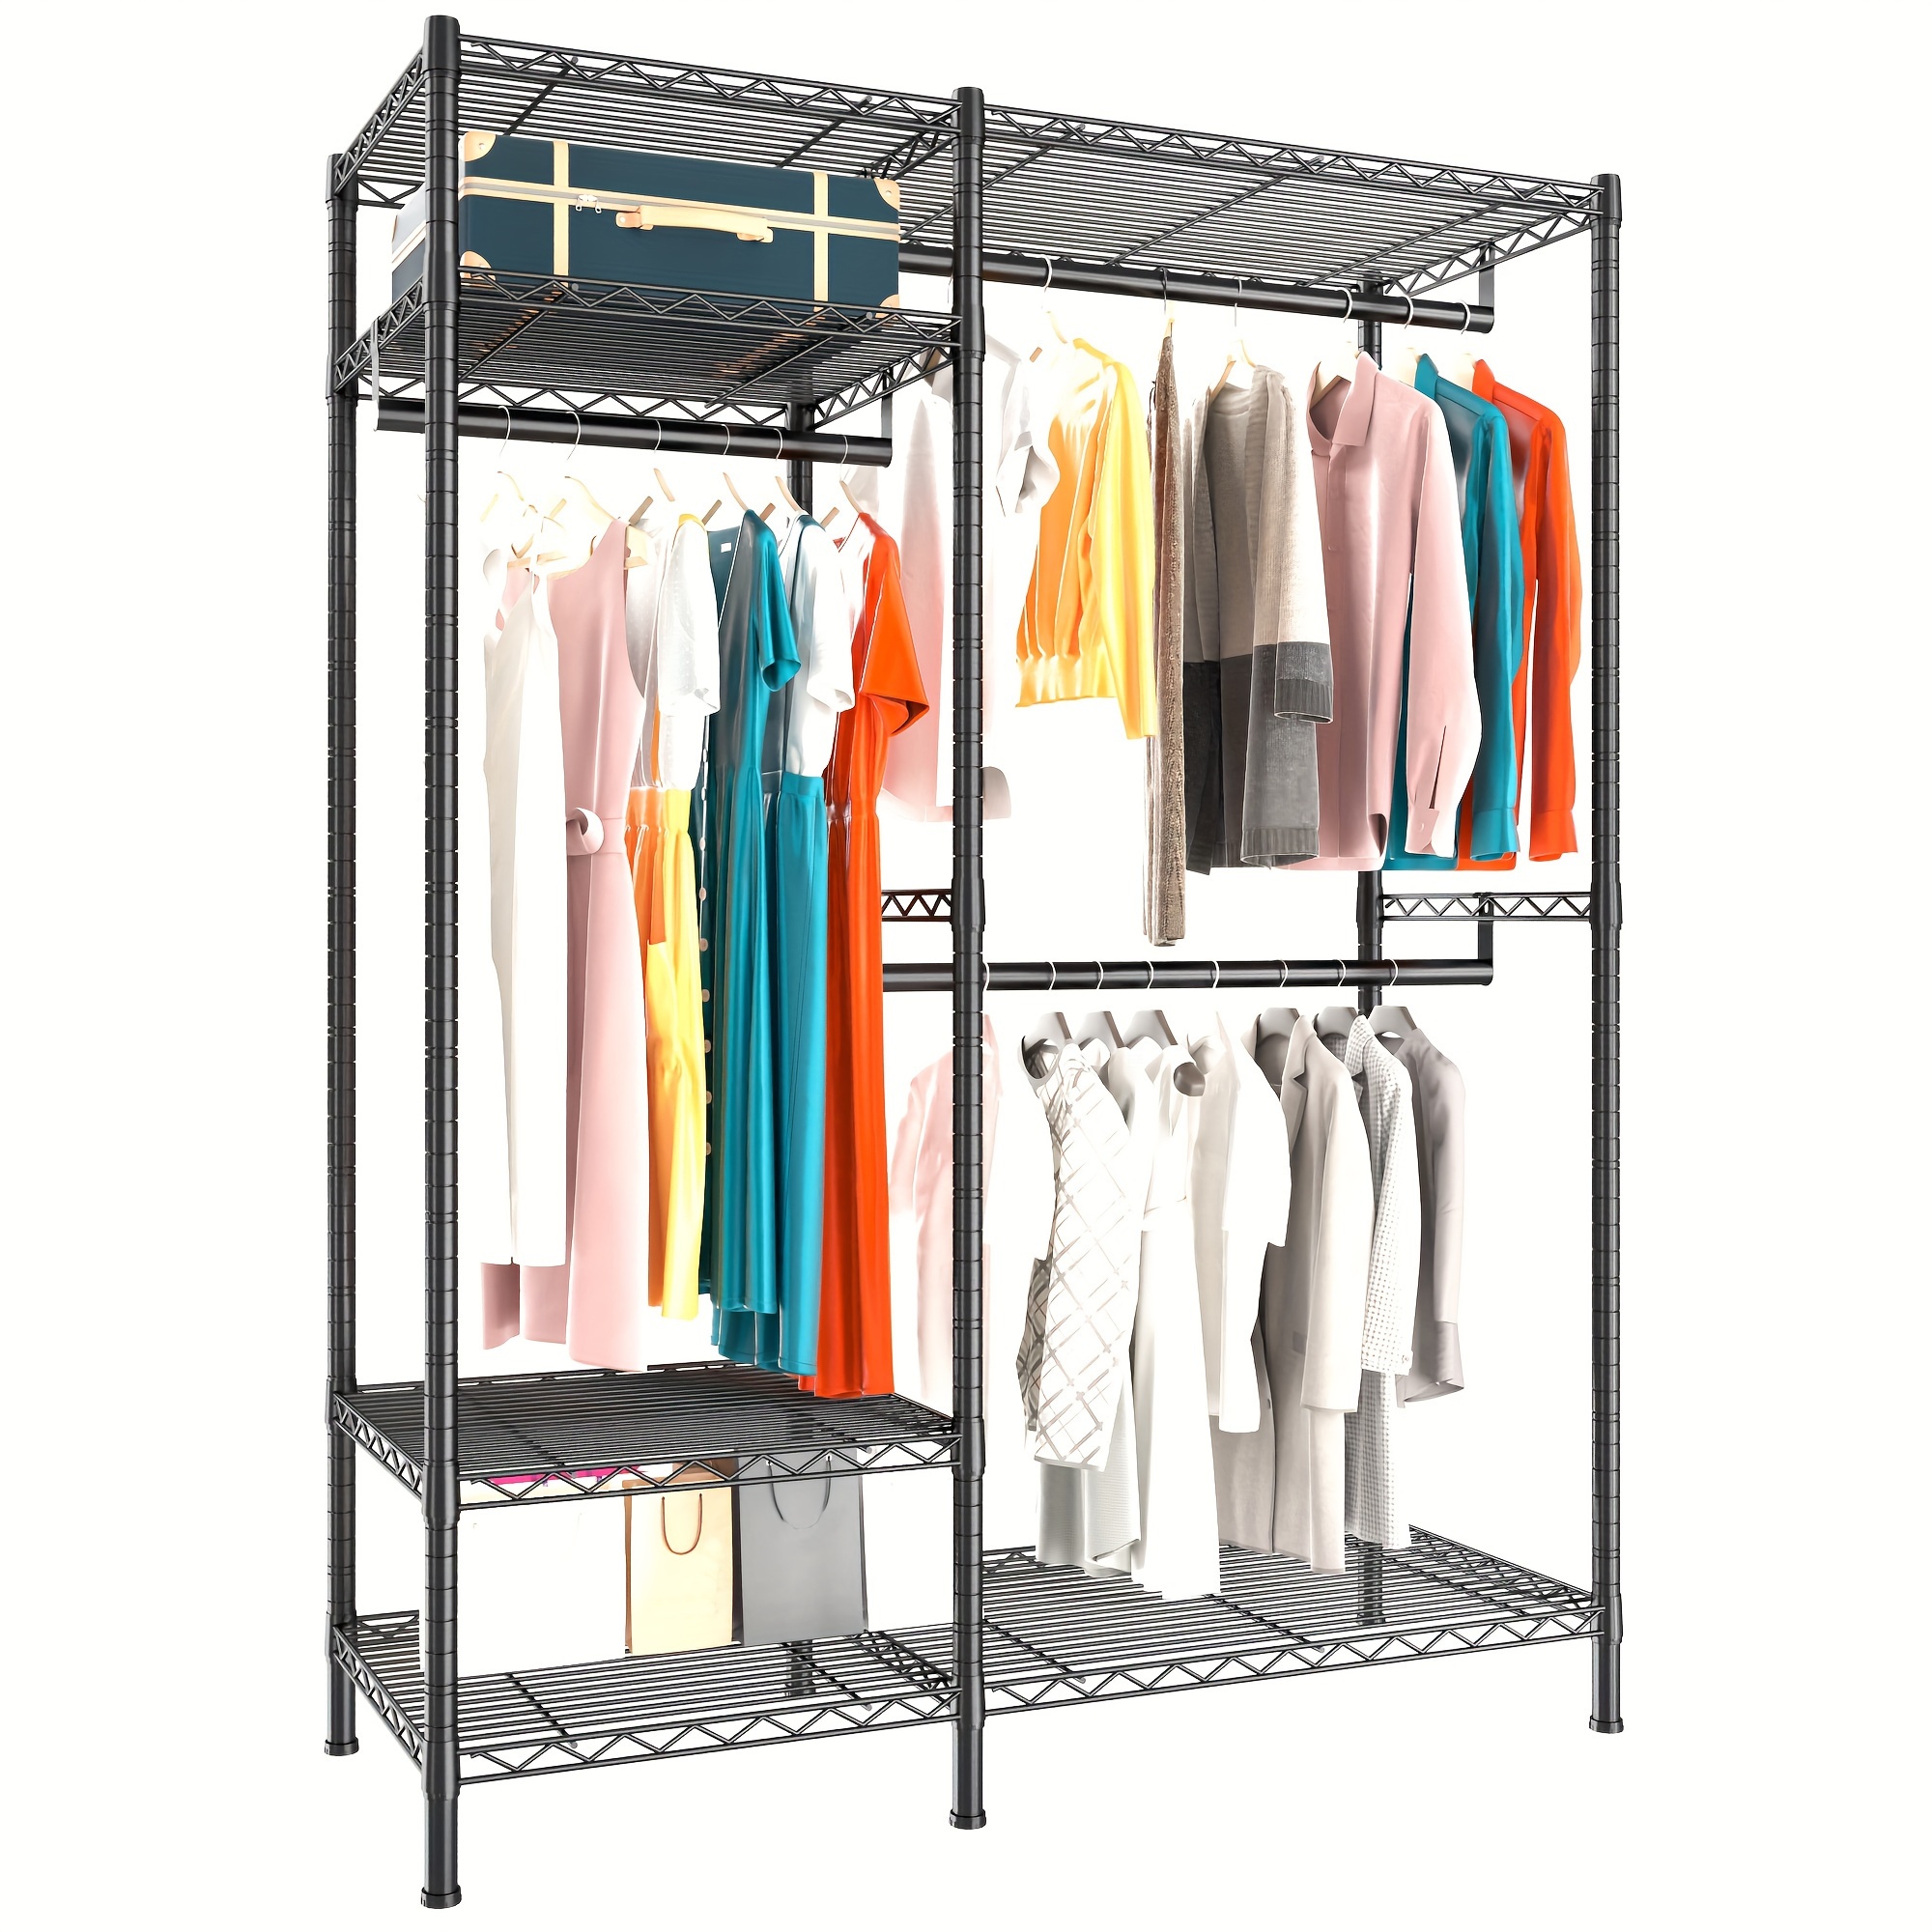 

Clothes Rack Heavy Duty Clothing Rack Load 700lbs Clothing Racks For Hanging Clothes Adjustable Closet Rack Metal Wadrobe Closet Wire Garment Rack Clothes Rack 45.5" W X 77.1" H X 16.8" D Black